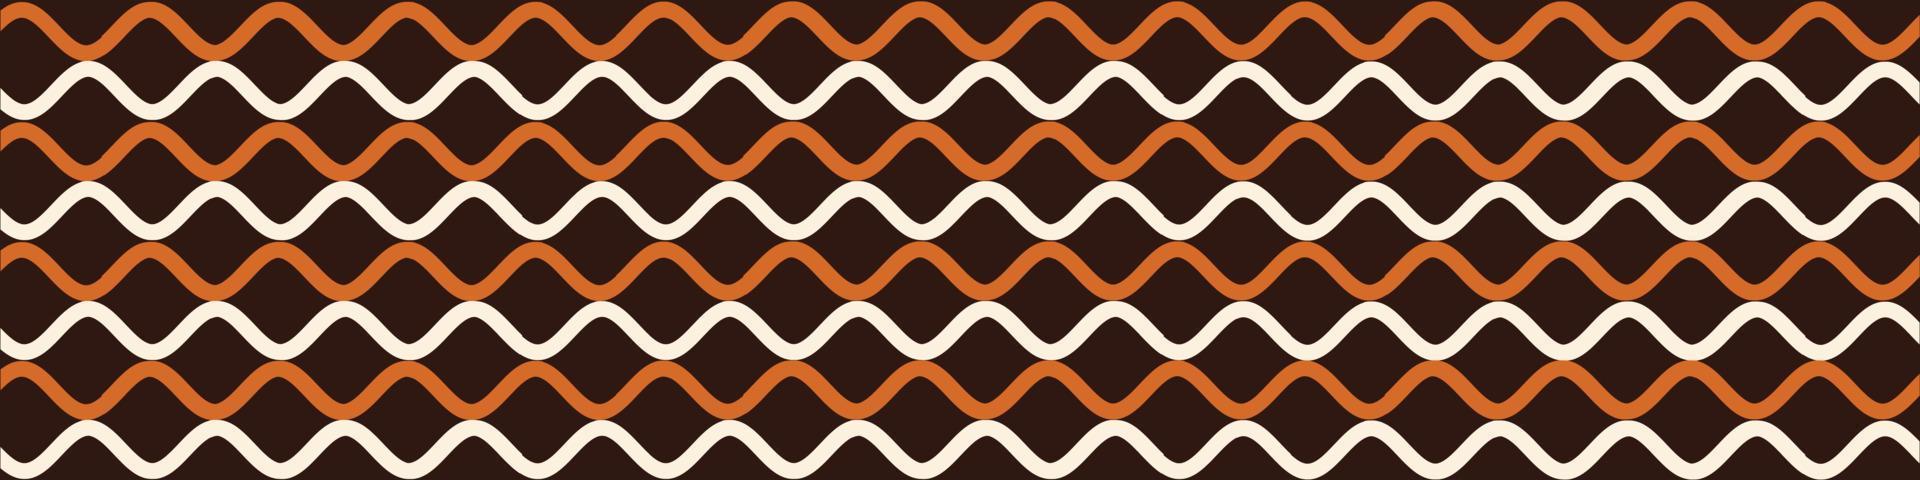 Horizontal background made of curved white and brown lines on brown background vector